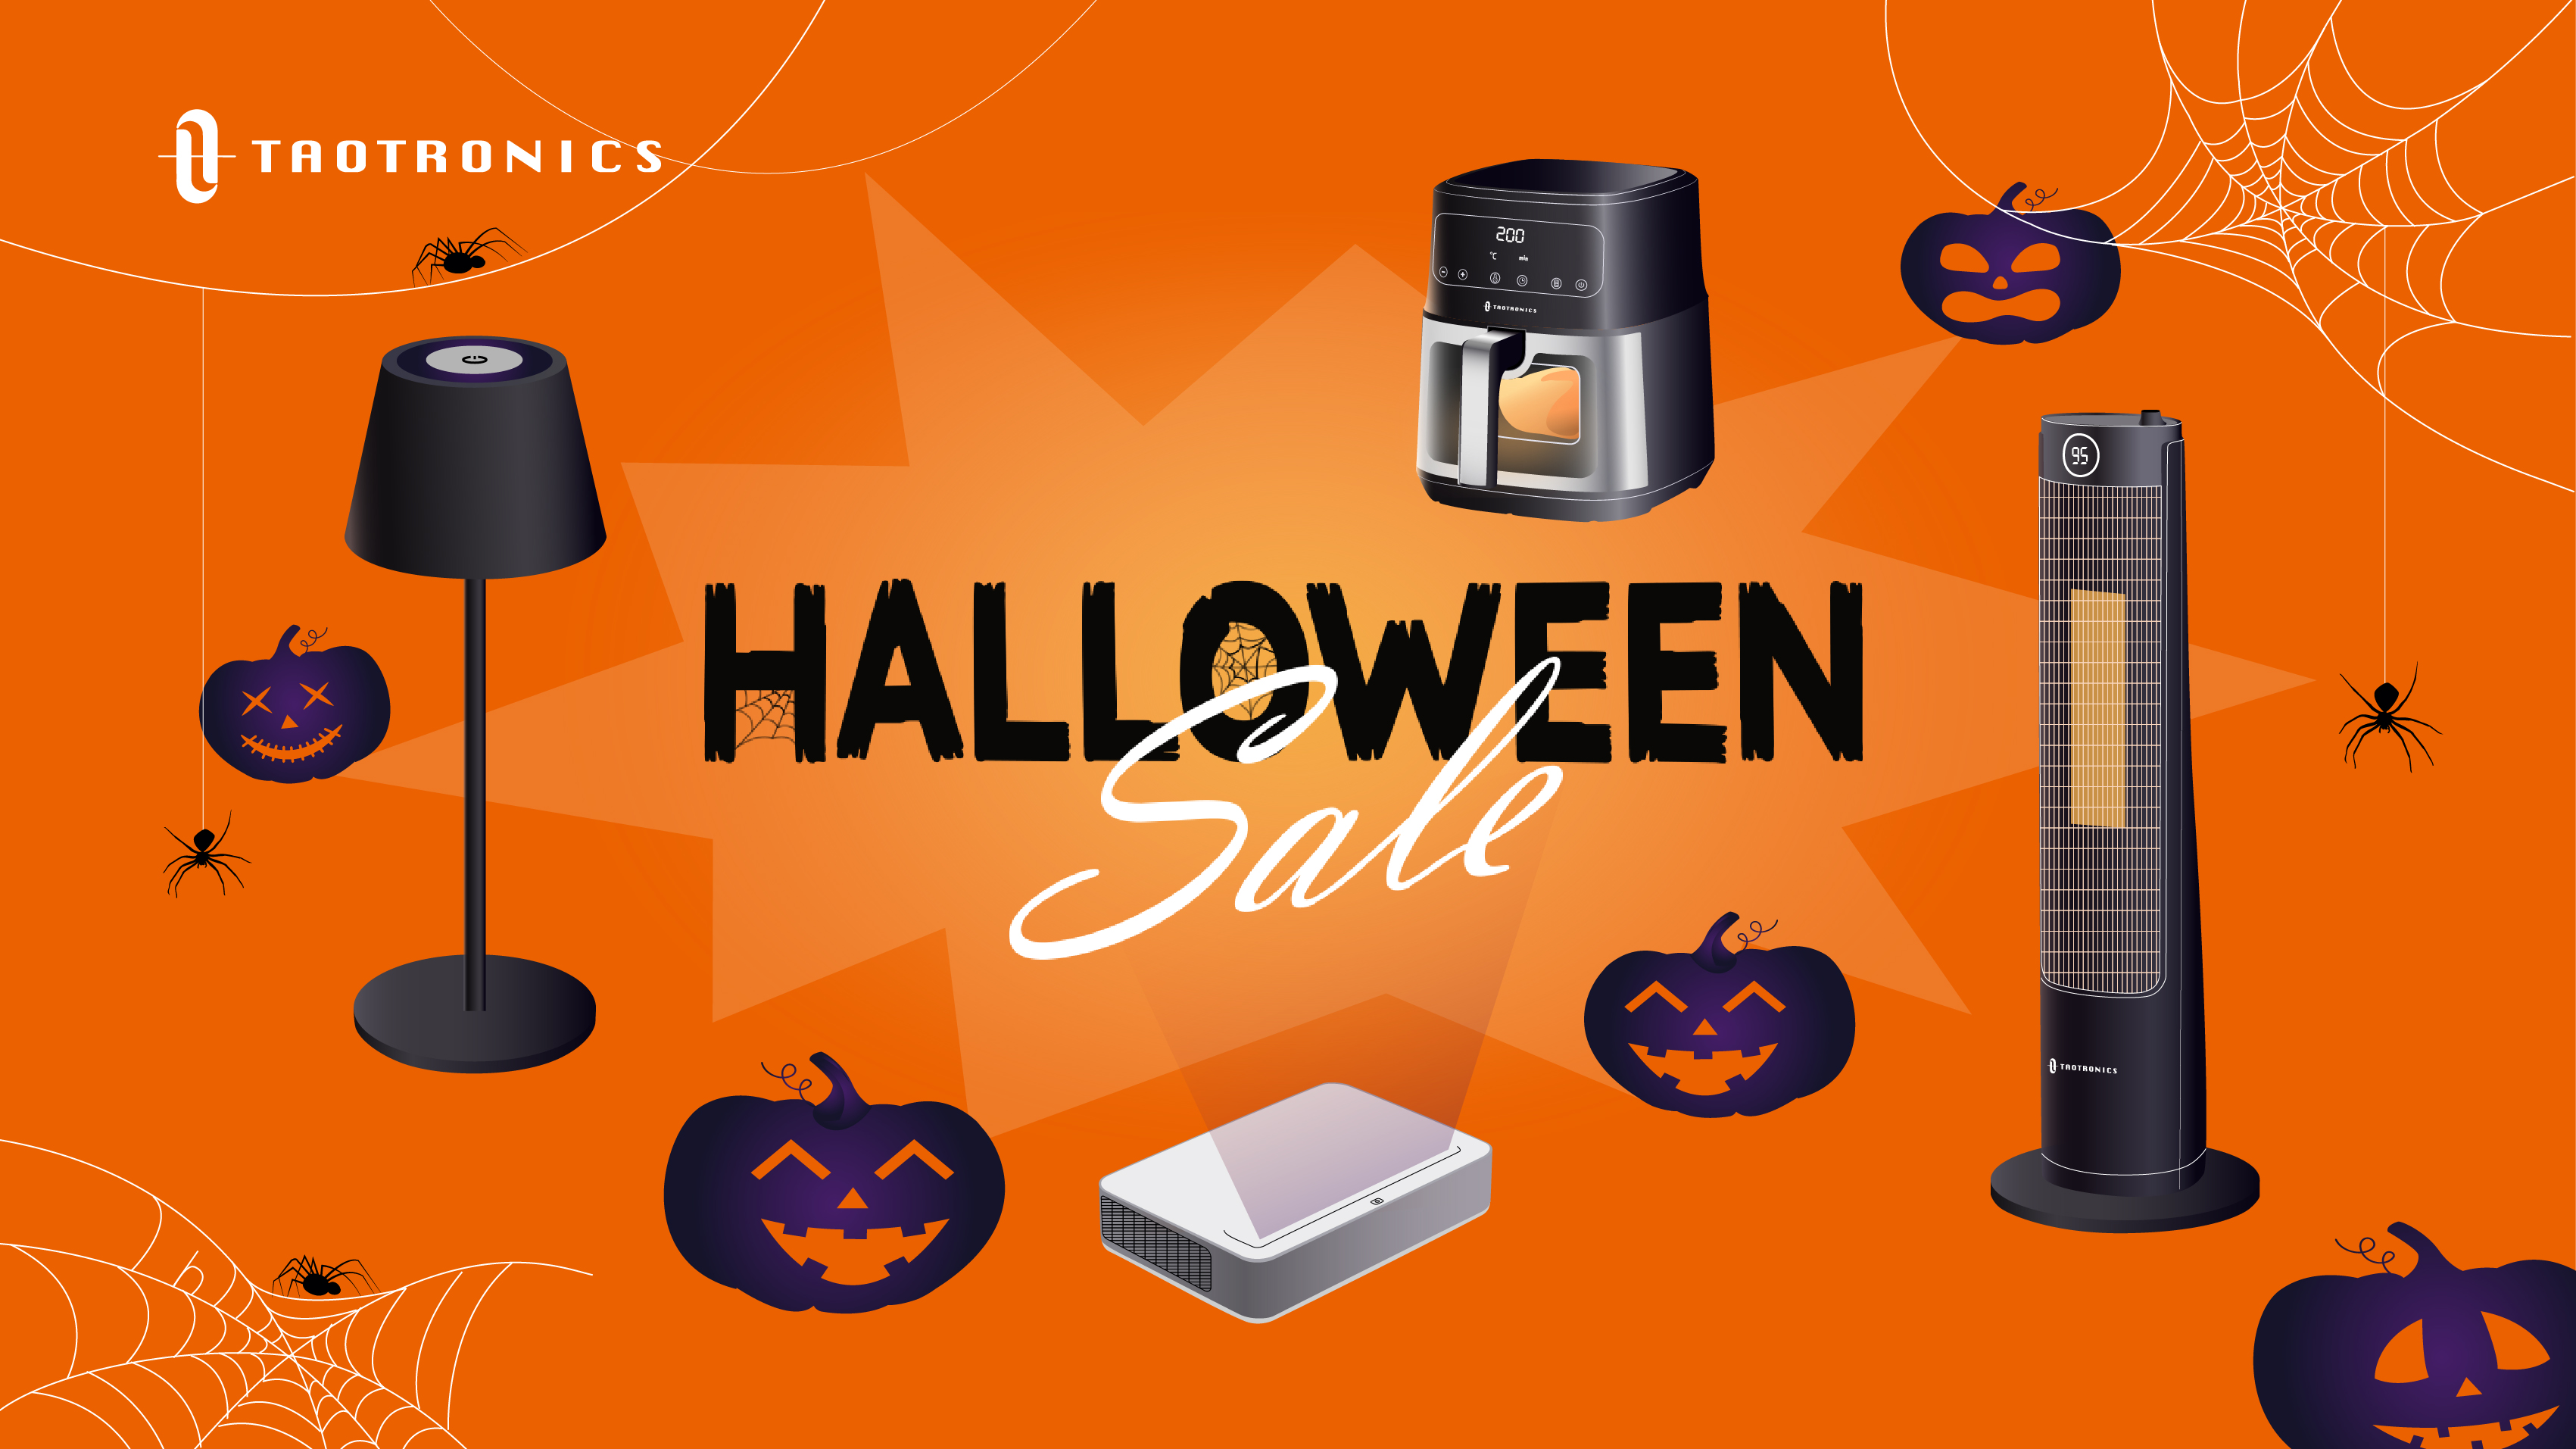 2023 Halloween Shopping List – What to Buy in this Spooky Season